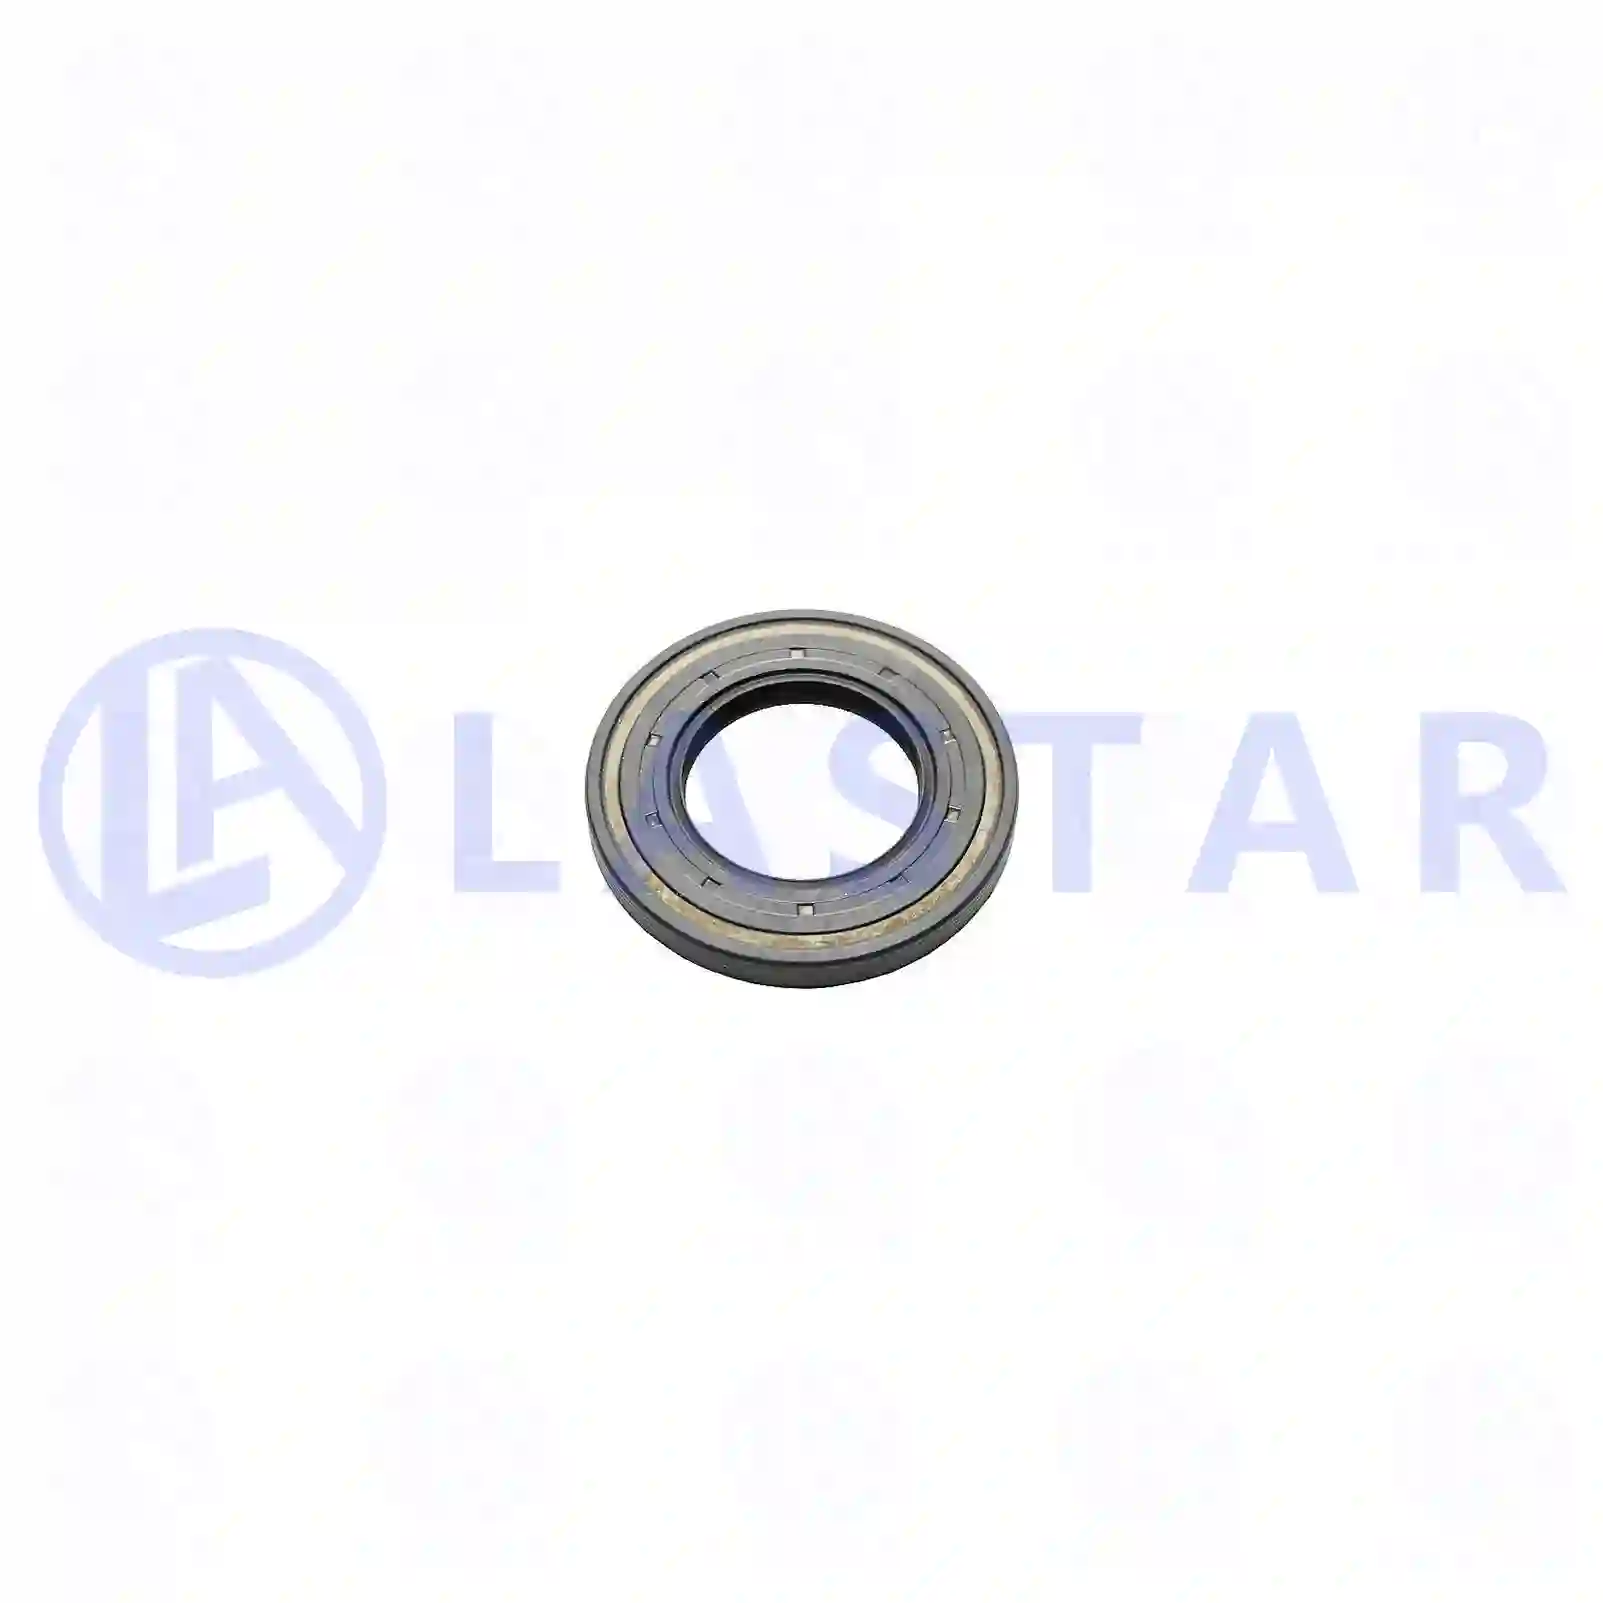 Oil seal, 77701126, 236202, 462035, 01125252, 01161983, 00538431, 40000110, 82022030, 0996480055, 44902474, 01125252, 01161983, 00538431, 236202, 462035, 1109870, 228109, 310951 ||  77701126 Lastar Spare Part | Truck Spare Parts, Auotomotive Spare Parts Oil seal, 77701126, 236202, 462035, 01125252, 01161983, 00538431, 40000110, 82022030, 0996480055, 44902474, 01125252, 01161983, 00538431, 236202, 462035, 1109870, 228109, 310951 ||  77701126 Lastar Spare Part | Truck Spare Parts, Auotomotive Spare Parts